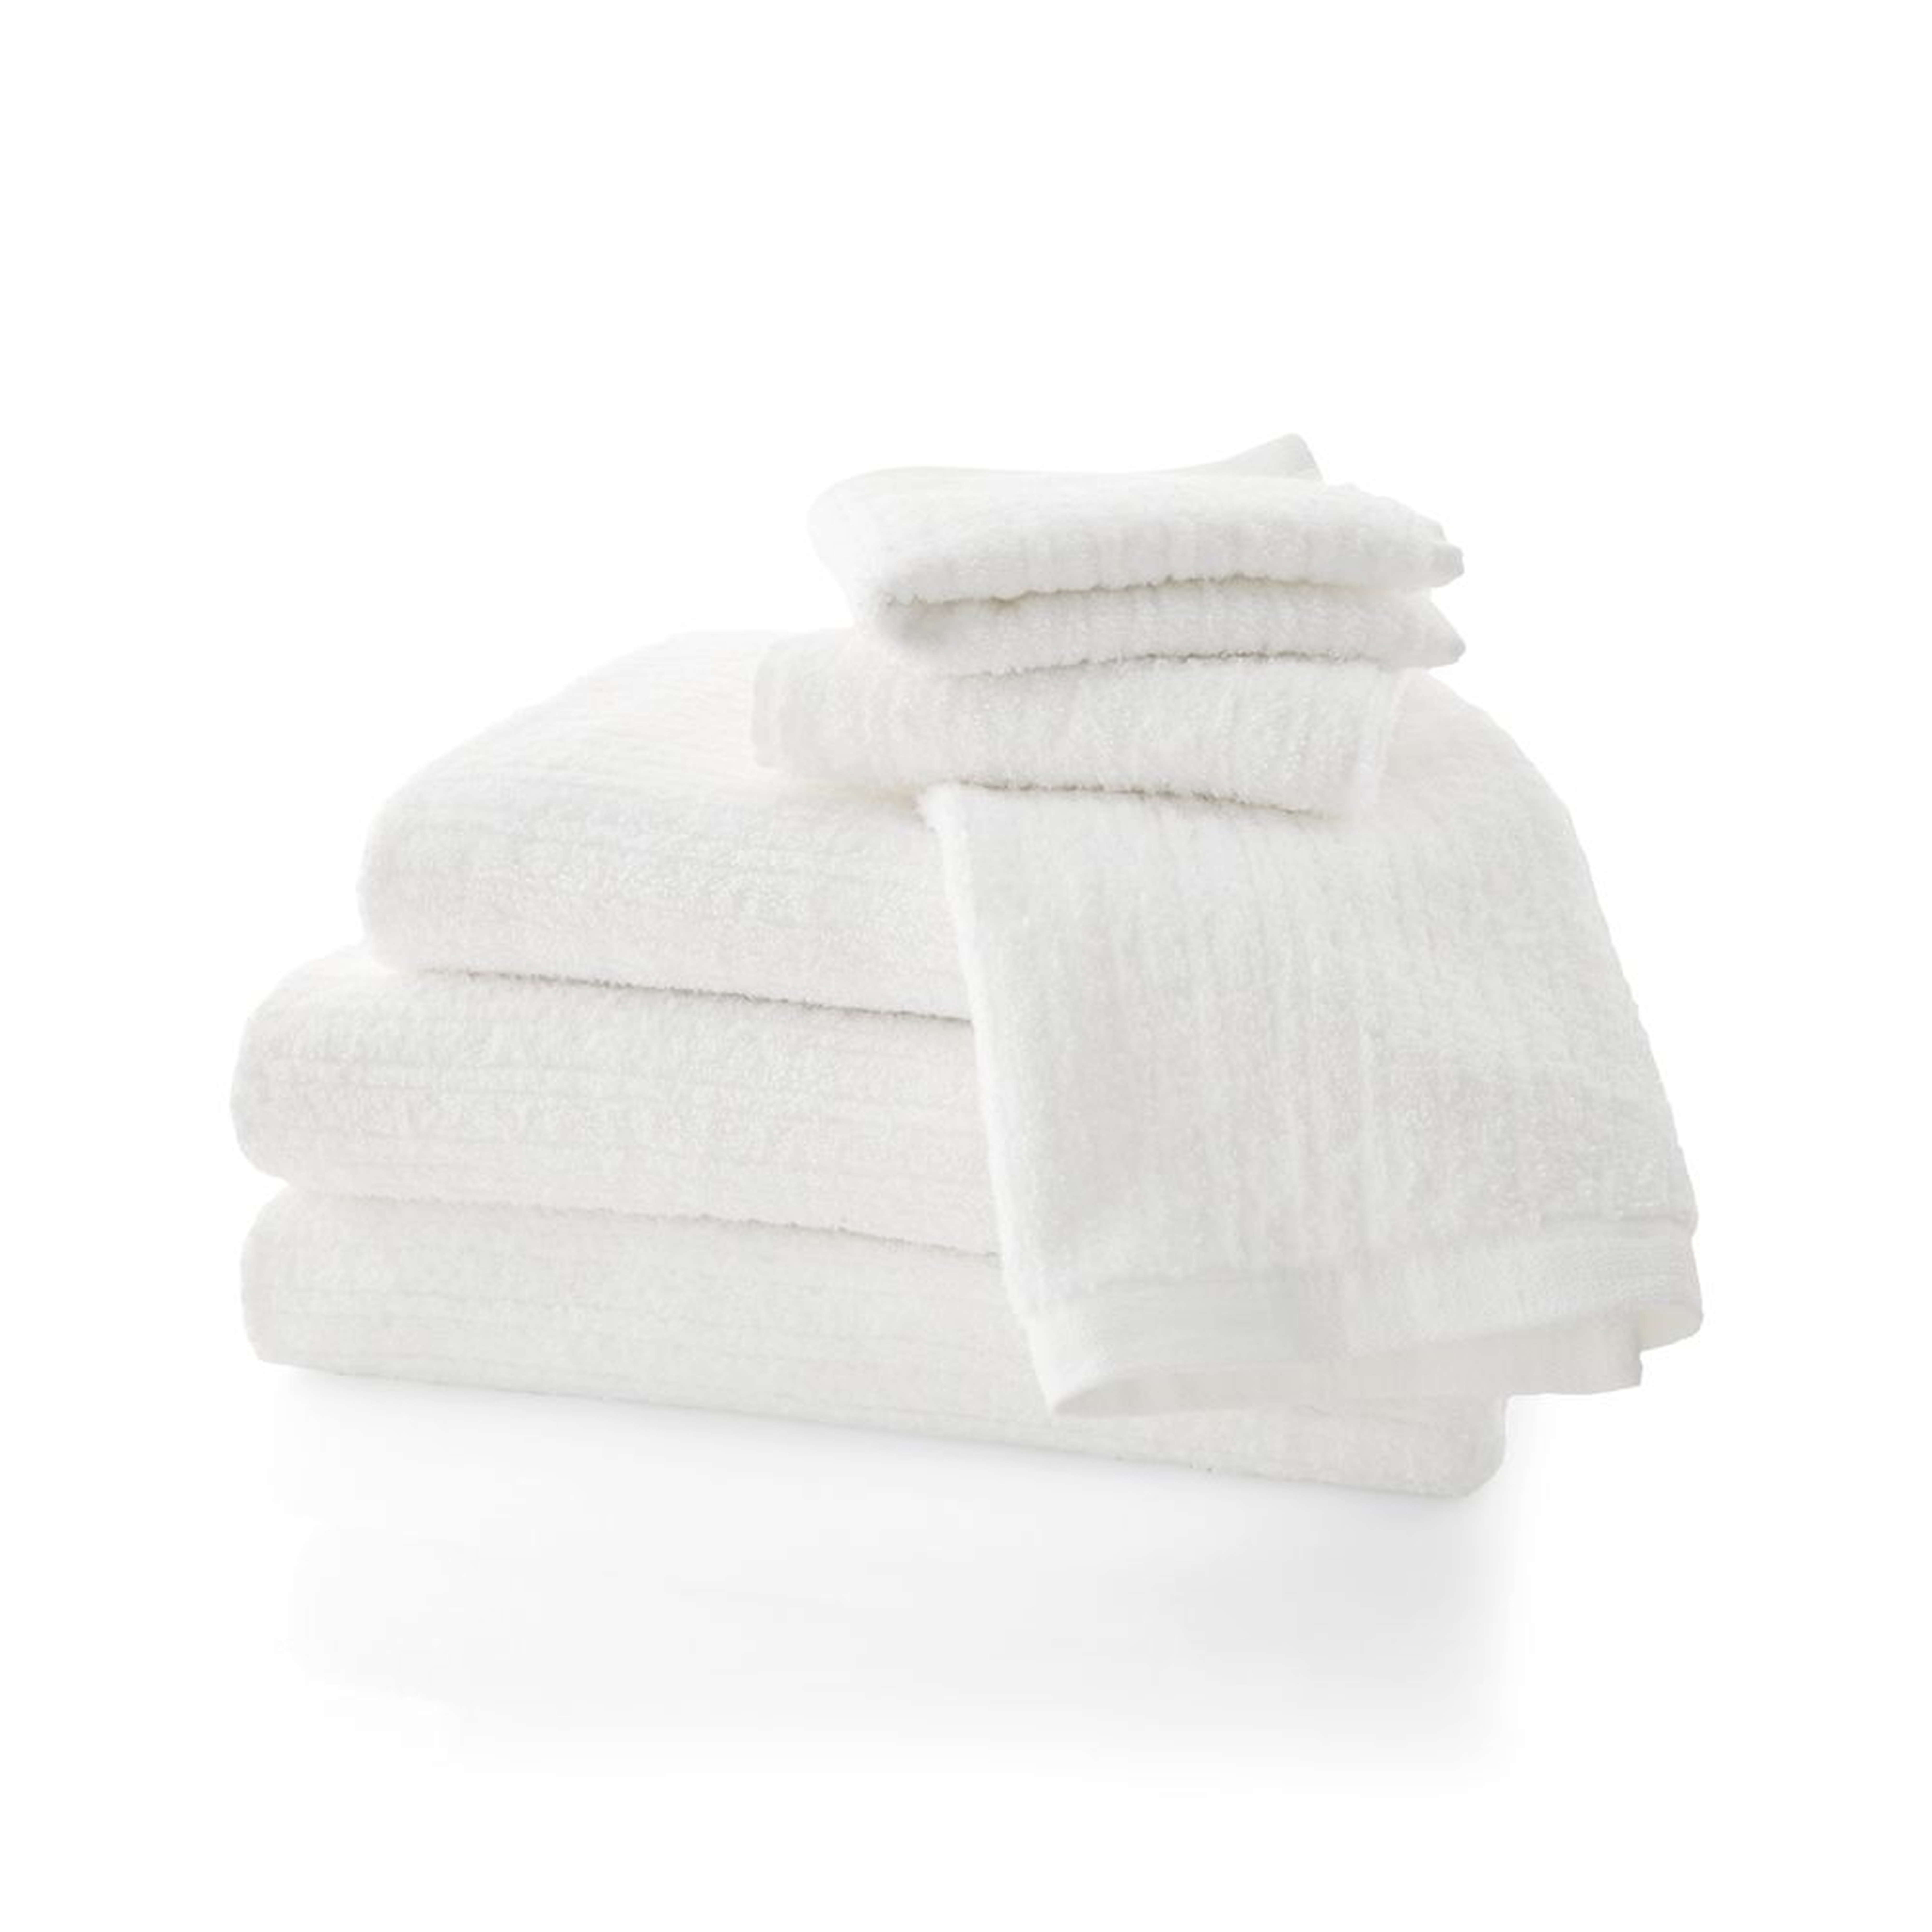 Ribbed White Towels, Set of 6 - Crate and Barrel